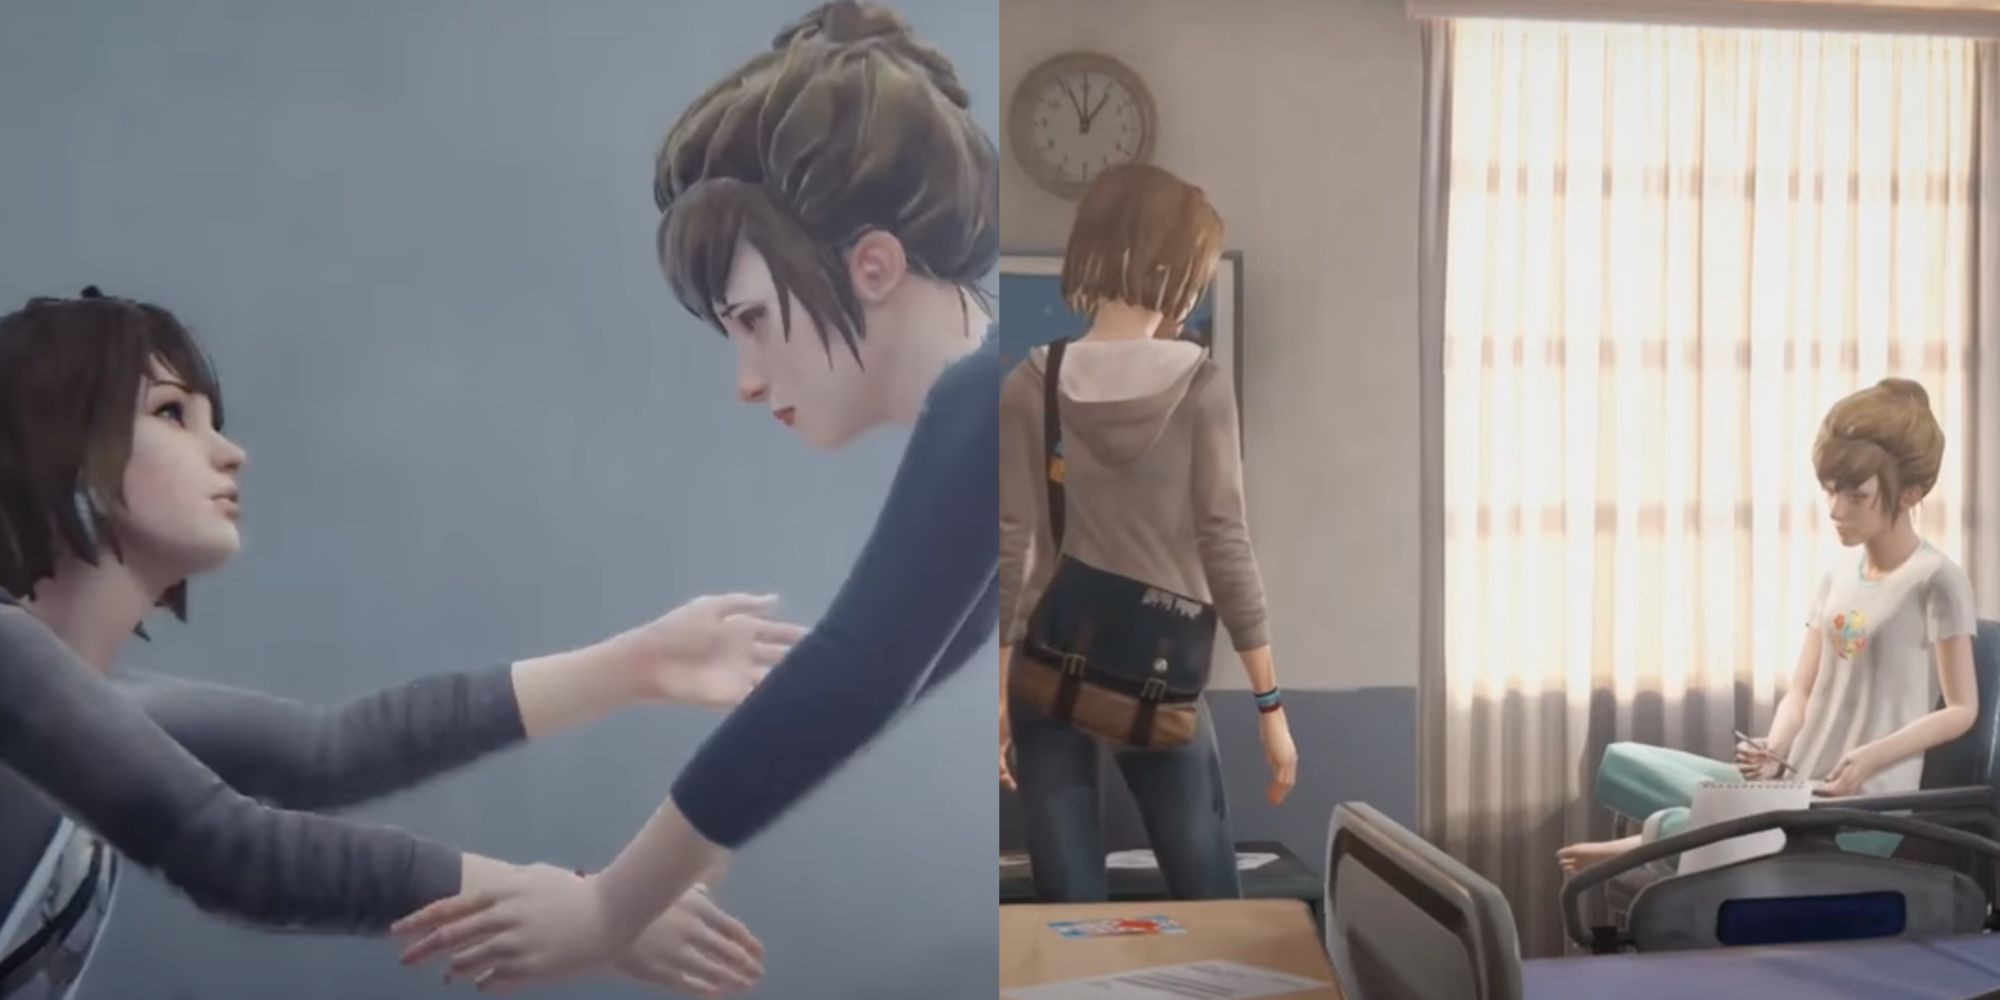 Life Is Strange Most Heartwarming Moments: Max Saves Kate and Hospital visit as they bond.